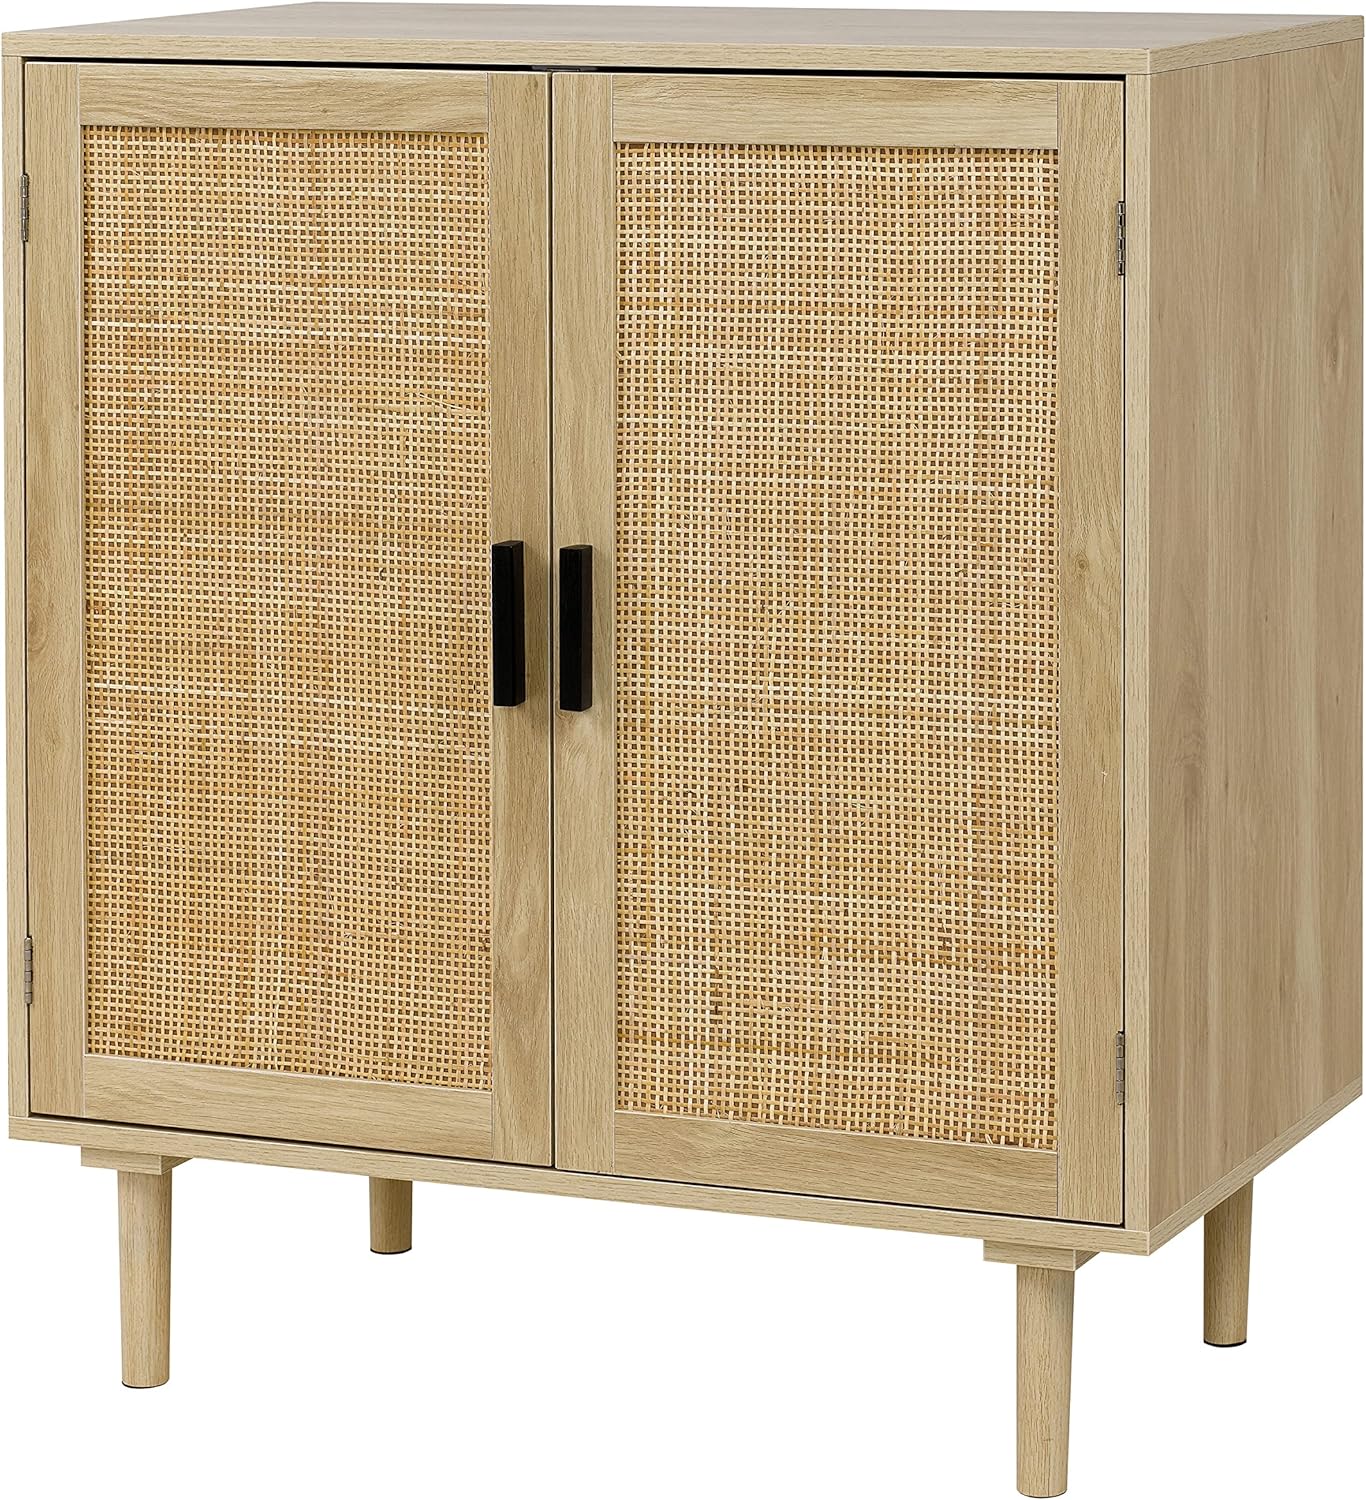 Finnhomy Sideboard Buffet Kitchen Storage Cabinet with Rattan Decorated Doors, Dining Room, Hallway, Cupboard Console Table, Liquor / Accent Cabinet, 31.5X 15.8X 34.6 Inches, Natural